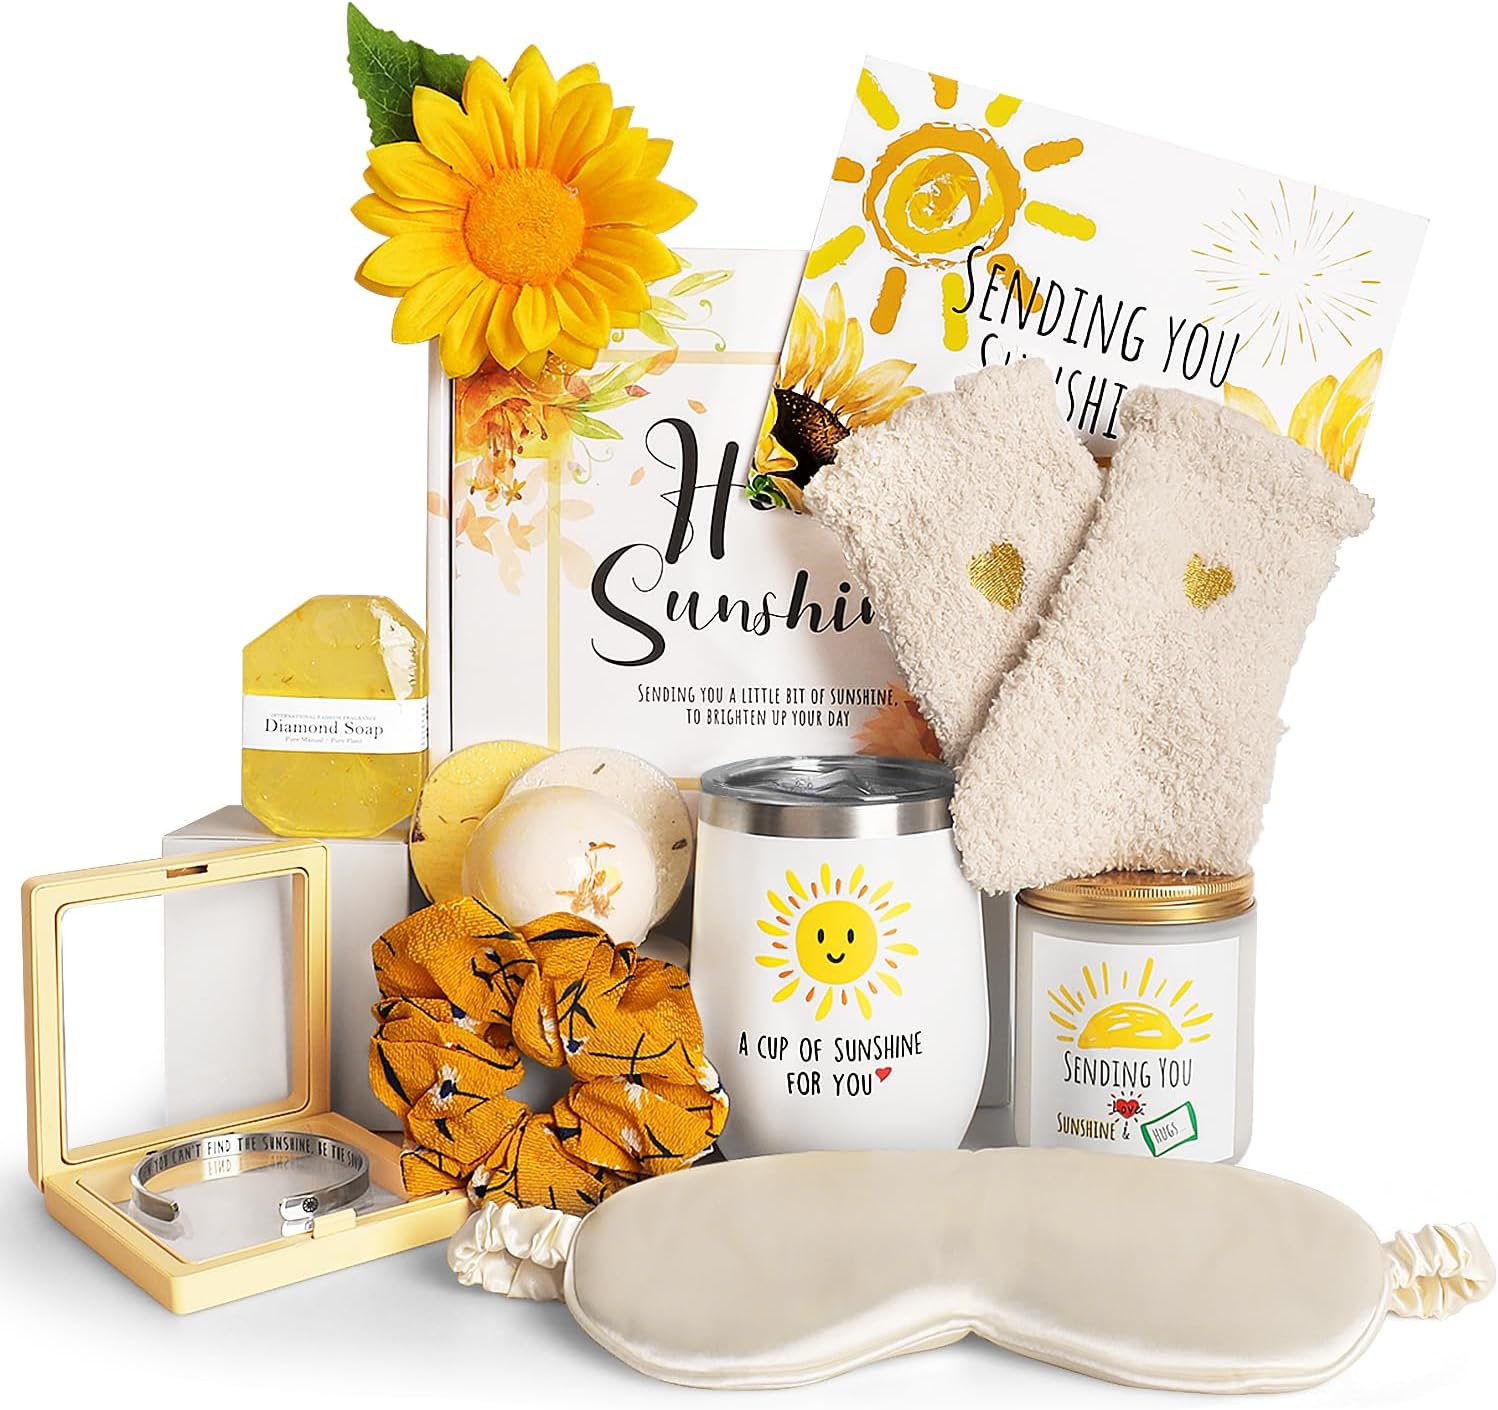 Time-Limited Discounts! Birthday Gifts for Women, Sunflower Gifts Sending Sunshine Christmas Gifts, Get Well Soon Gifts Basket Care Package Unique Relaxation Gifts Box for Thinking of You Her Sister Best Friend (Old Price: $, New Price: $, Discount percent: %, Saving: $)